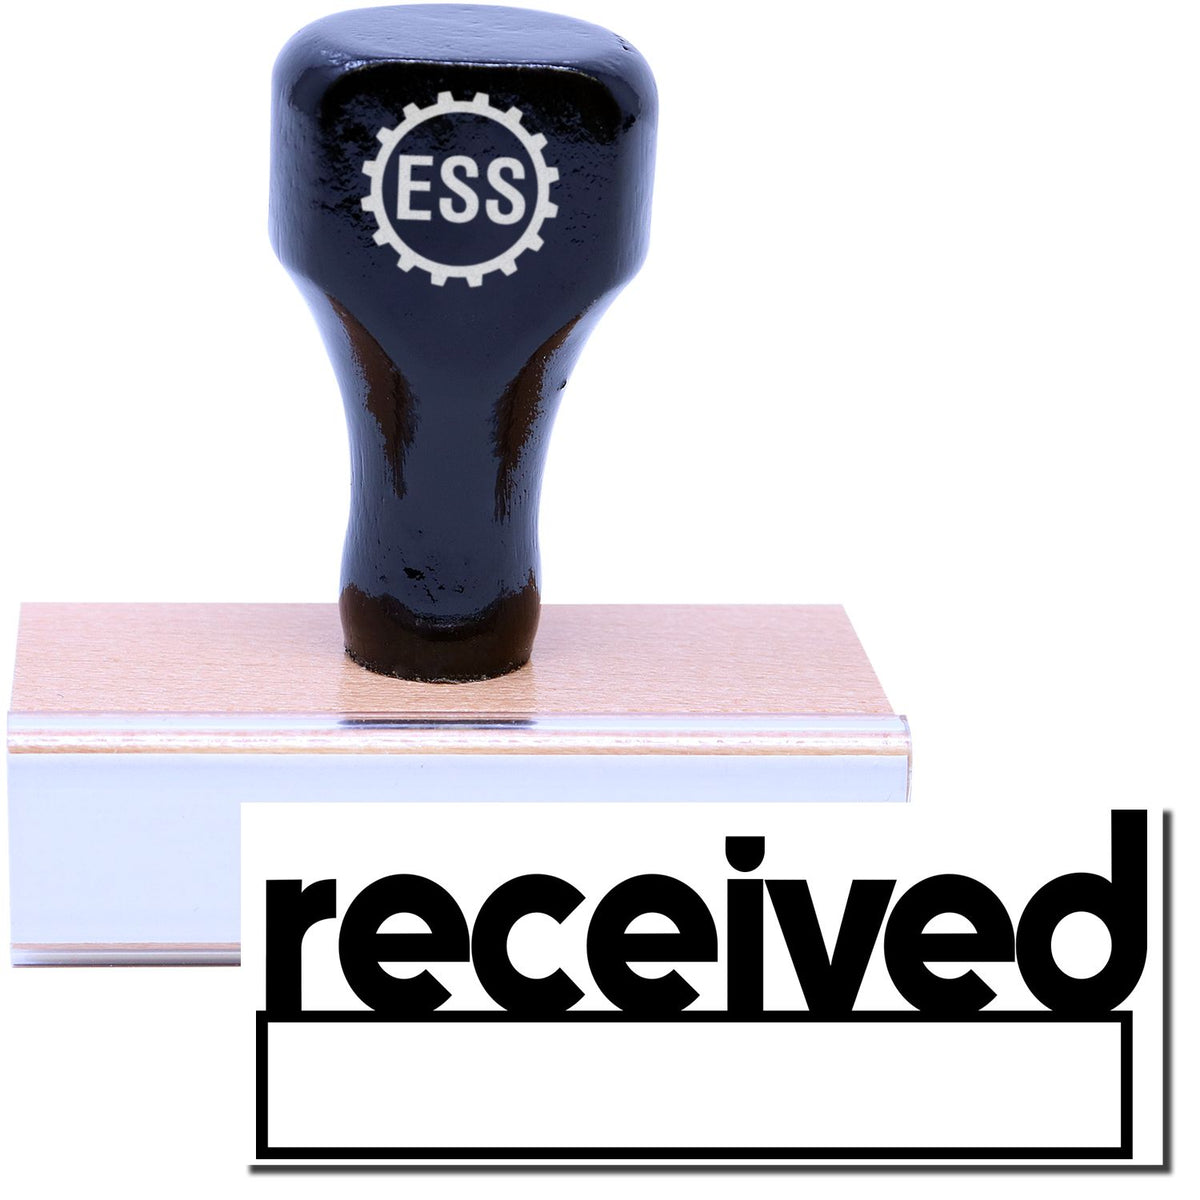 A stock office rubber stamp with a stamped image showing how the text &quot;received&quot; in lowercase letters with a date box underneath the text is displayed after stamping.